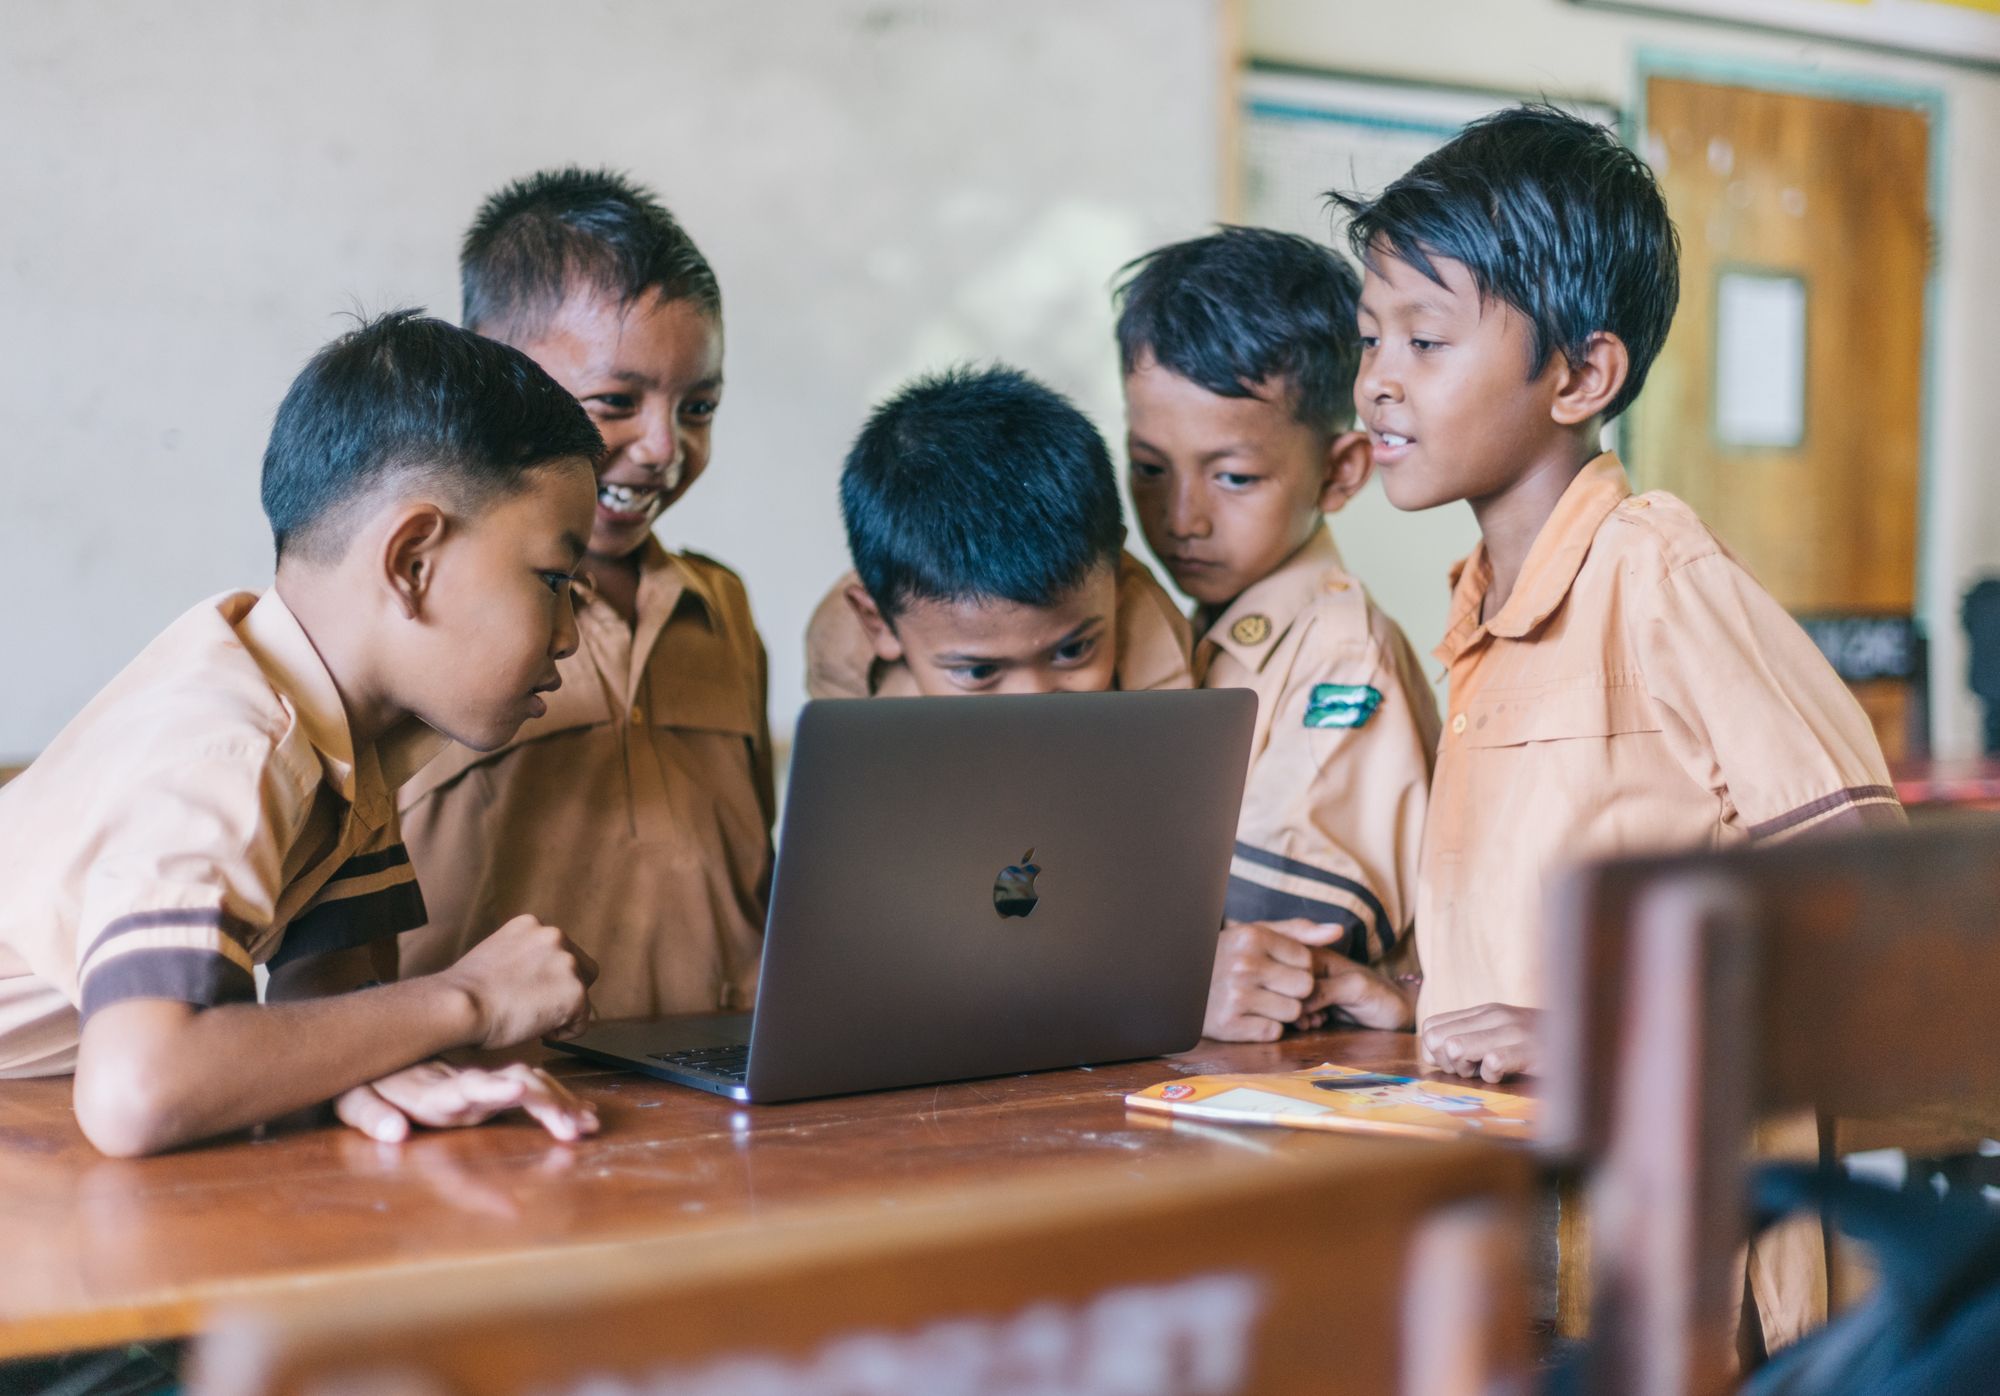 Five boys look intently at the screen of a laptop in their classroom